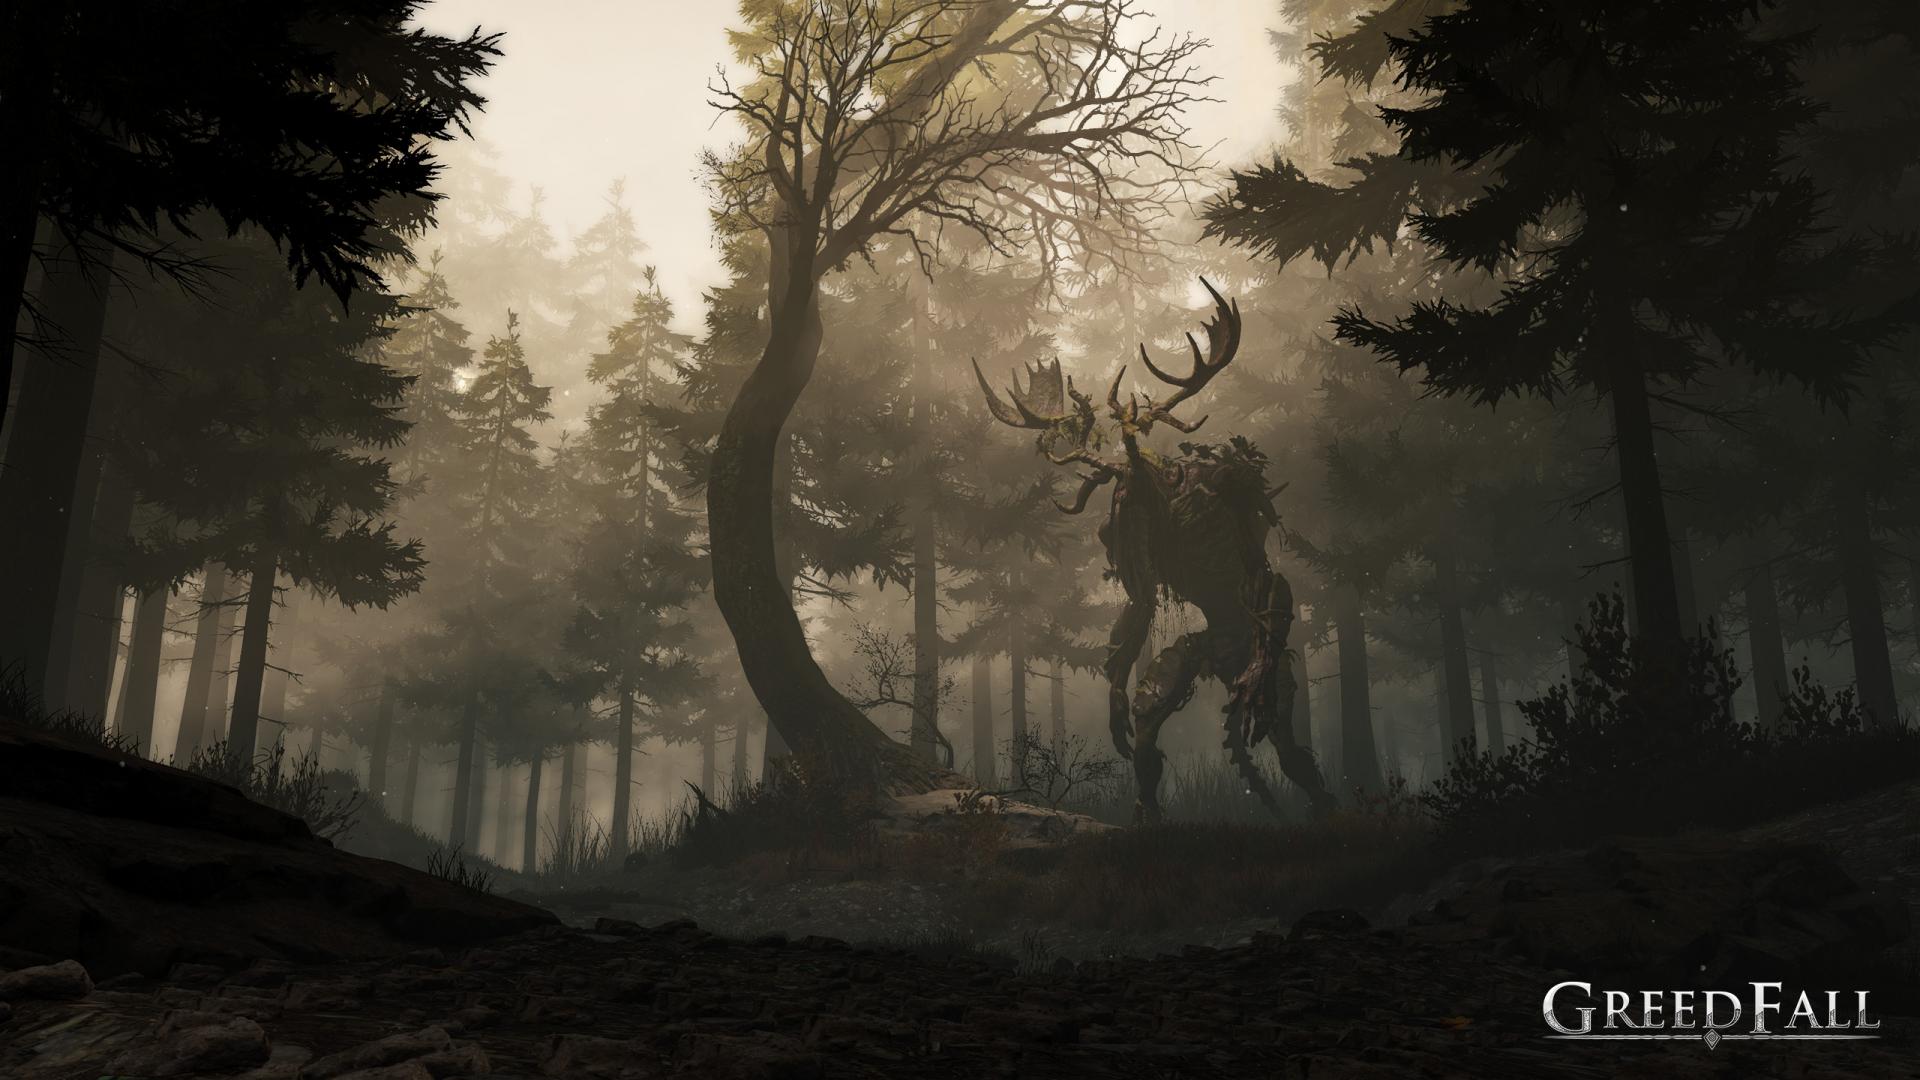 https://spiders-games.com/sites/default/files/styles/game_screenshot_gallery_lightbox/public/media-images/greedfall-02.png.jpg?itok=tOzFz0Ex